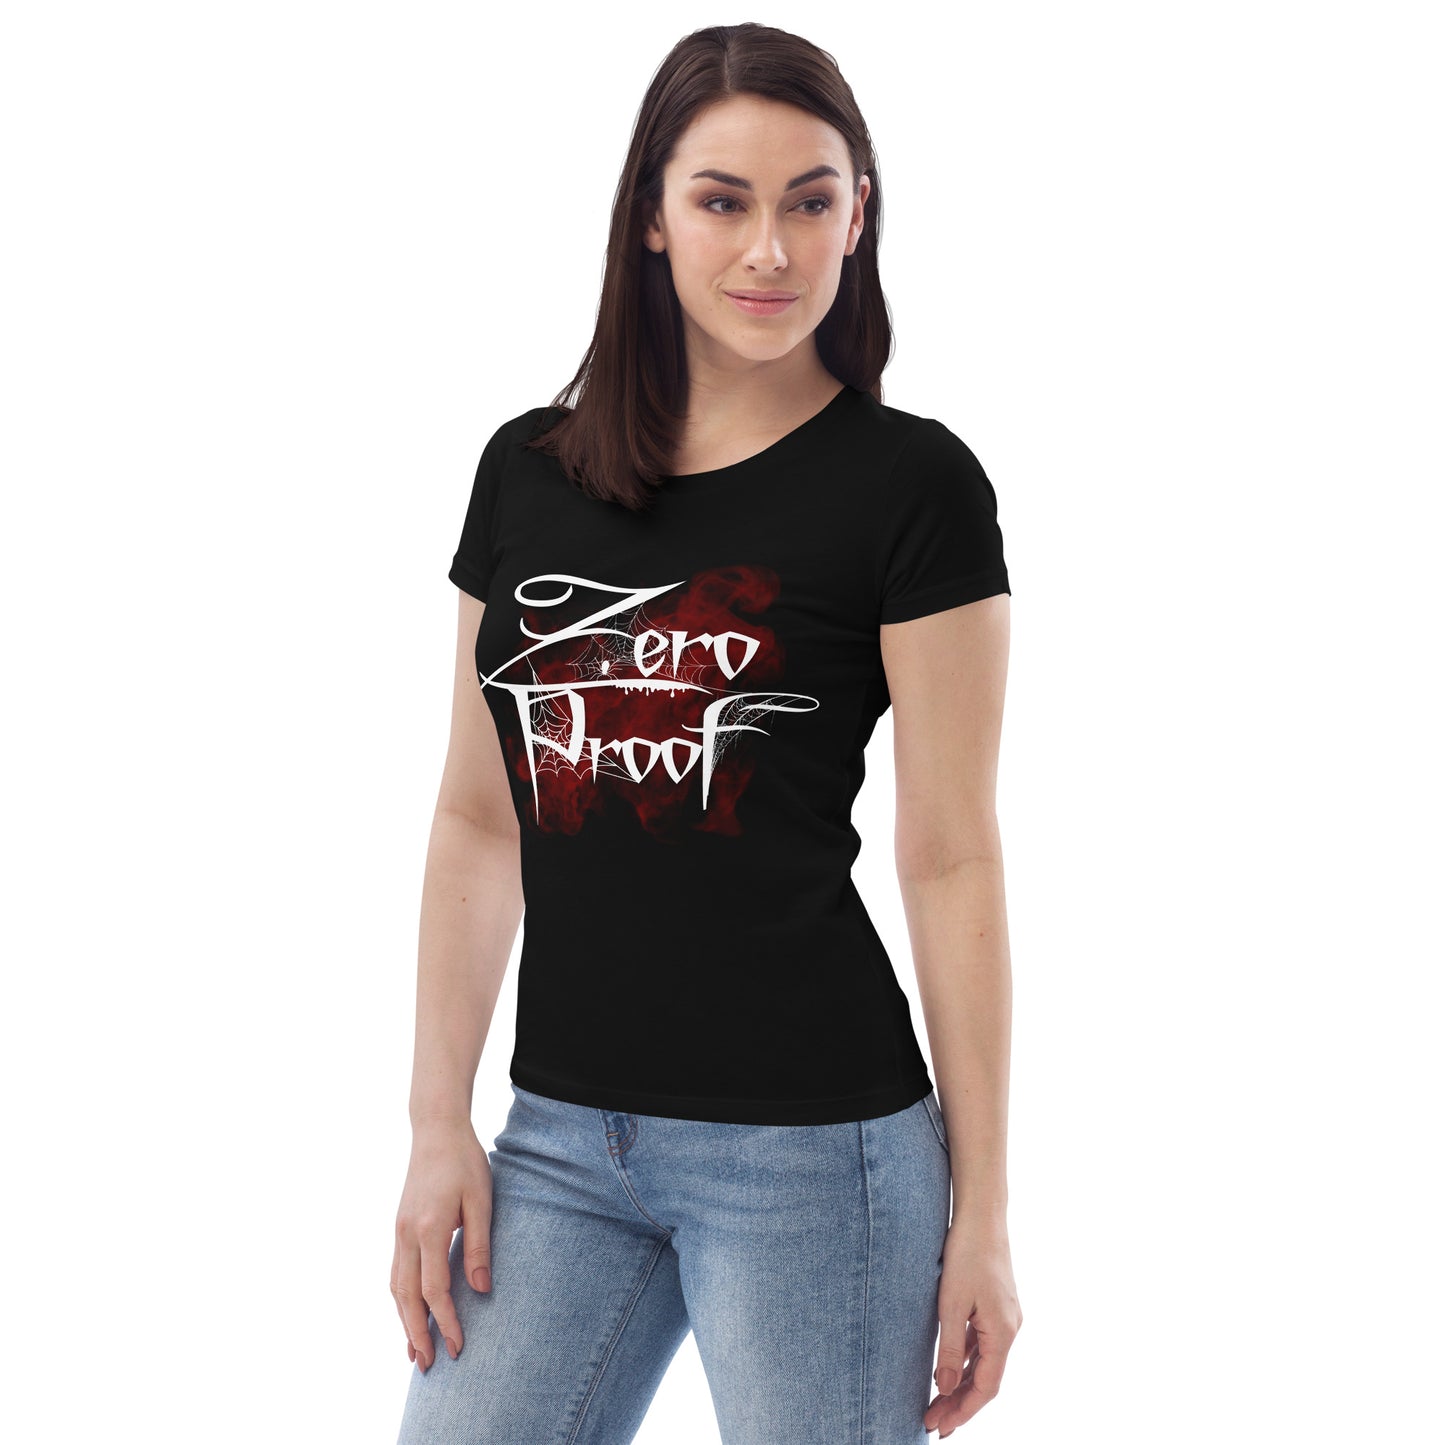 Zero Proof Red Mist - Women's fitted eco tee